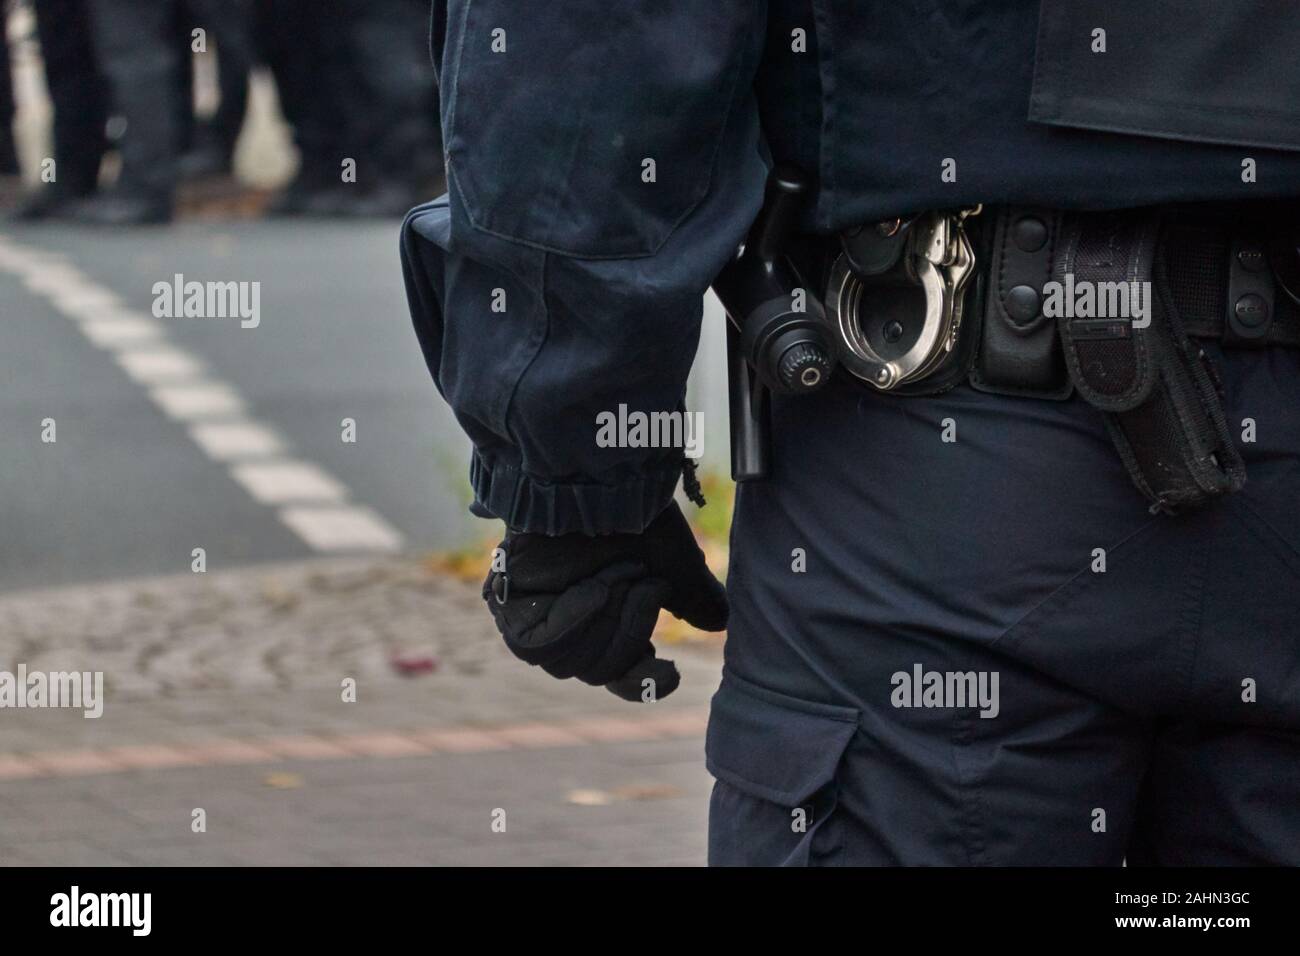 Belt of a policeman in black uniform in action, with handcuffs, baton and belt bag. Stock Photo